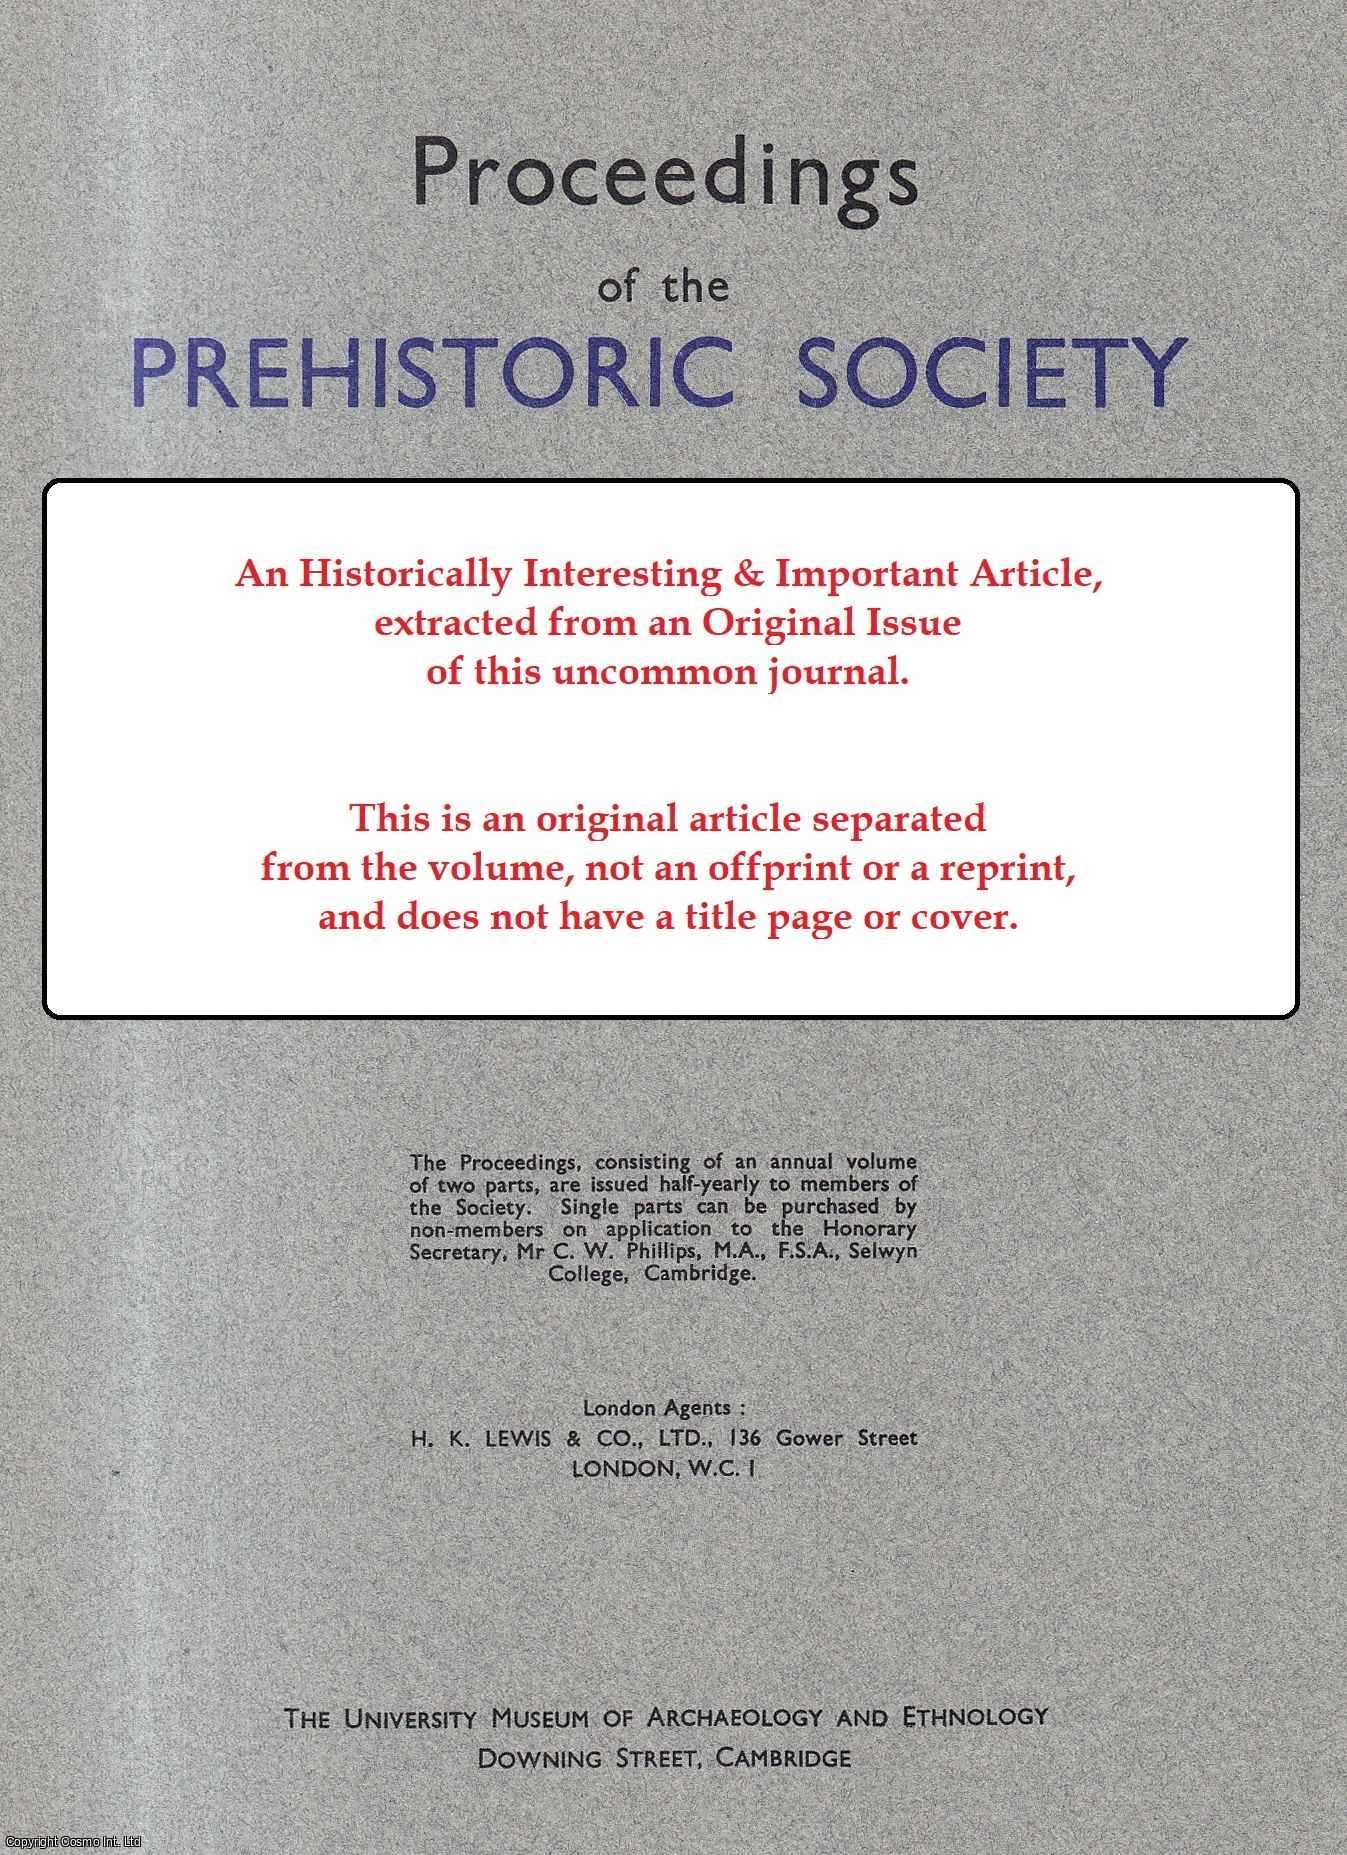 Thomas F. Lynch - The Lower Perigordian in French Archaeology. An original article from Proceedings of the Prehistoric Society, 1966.